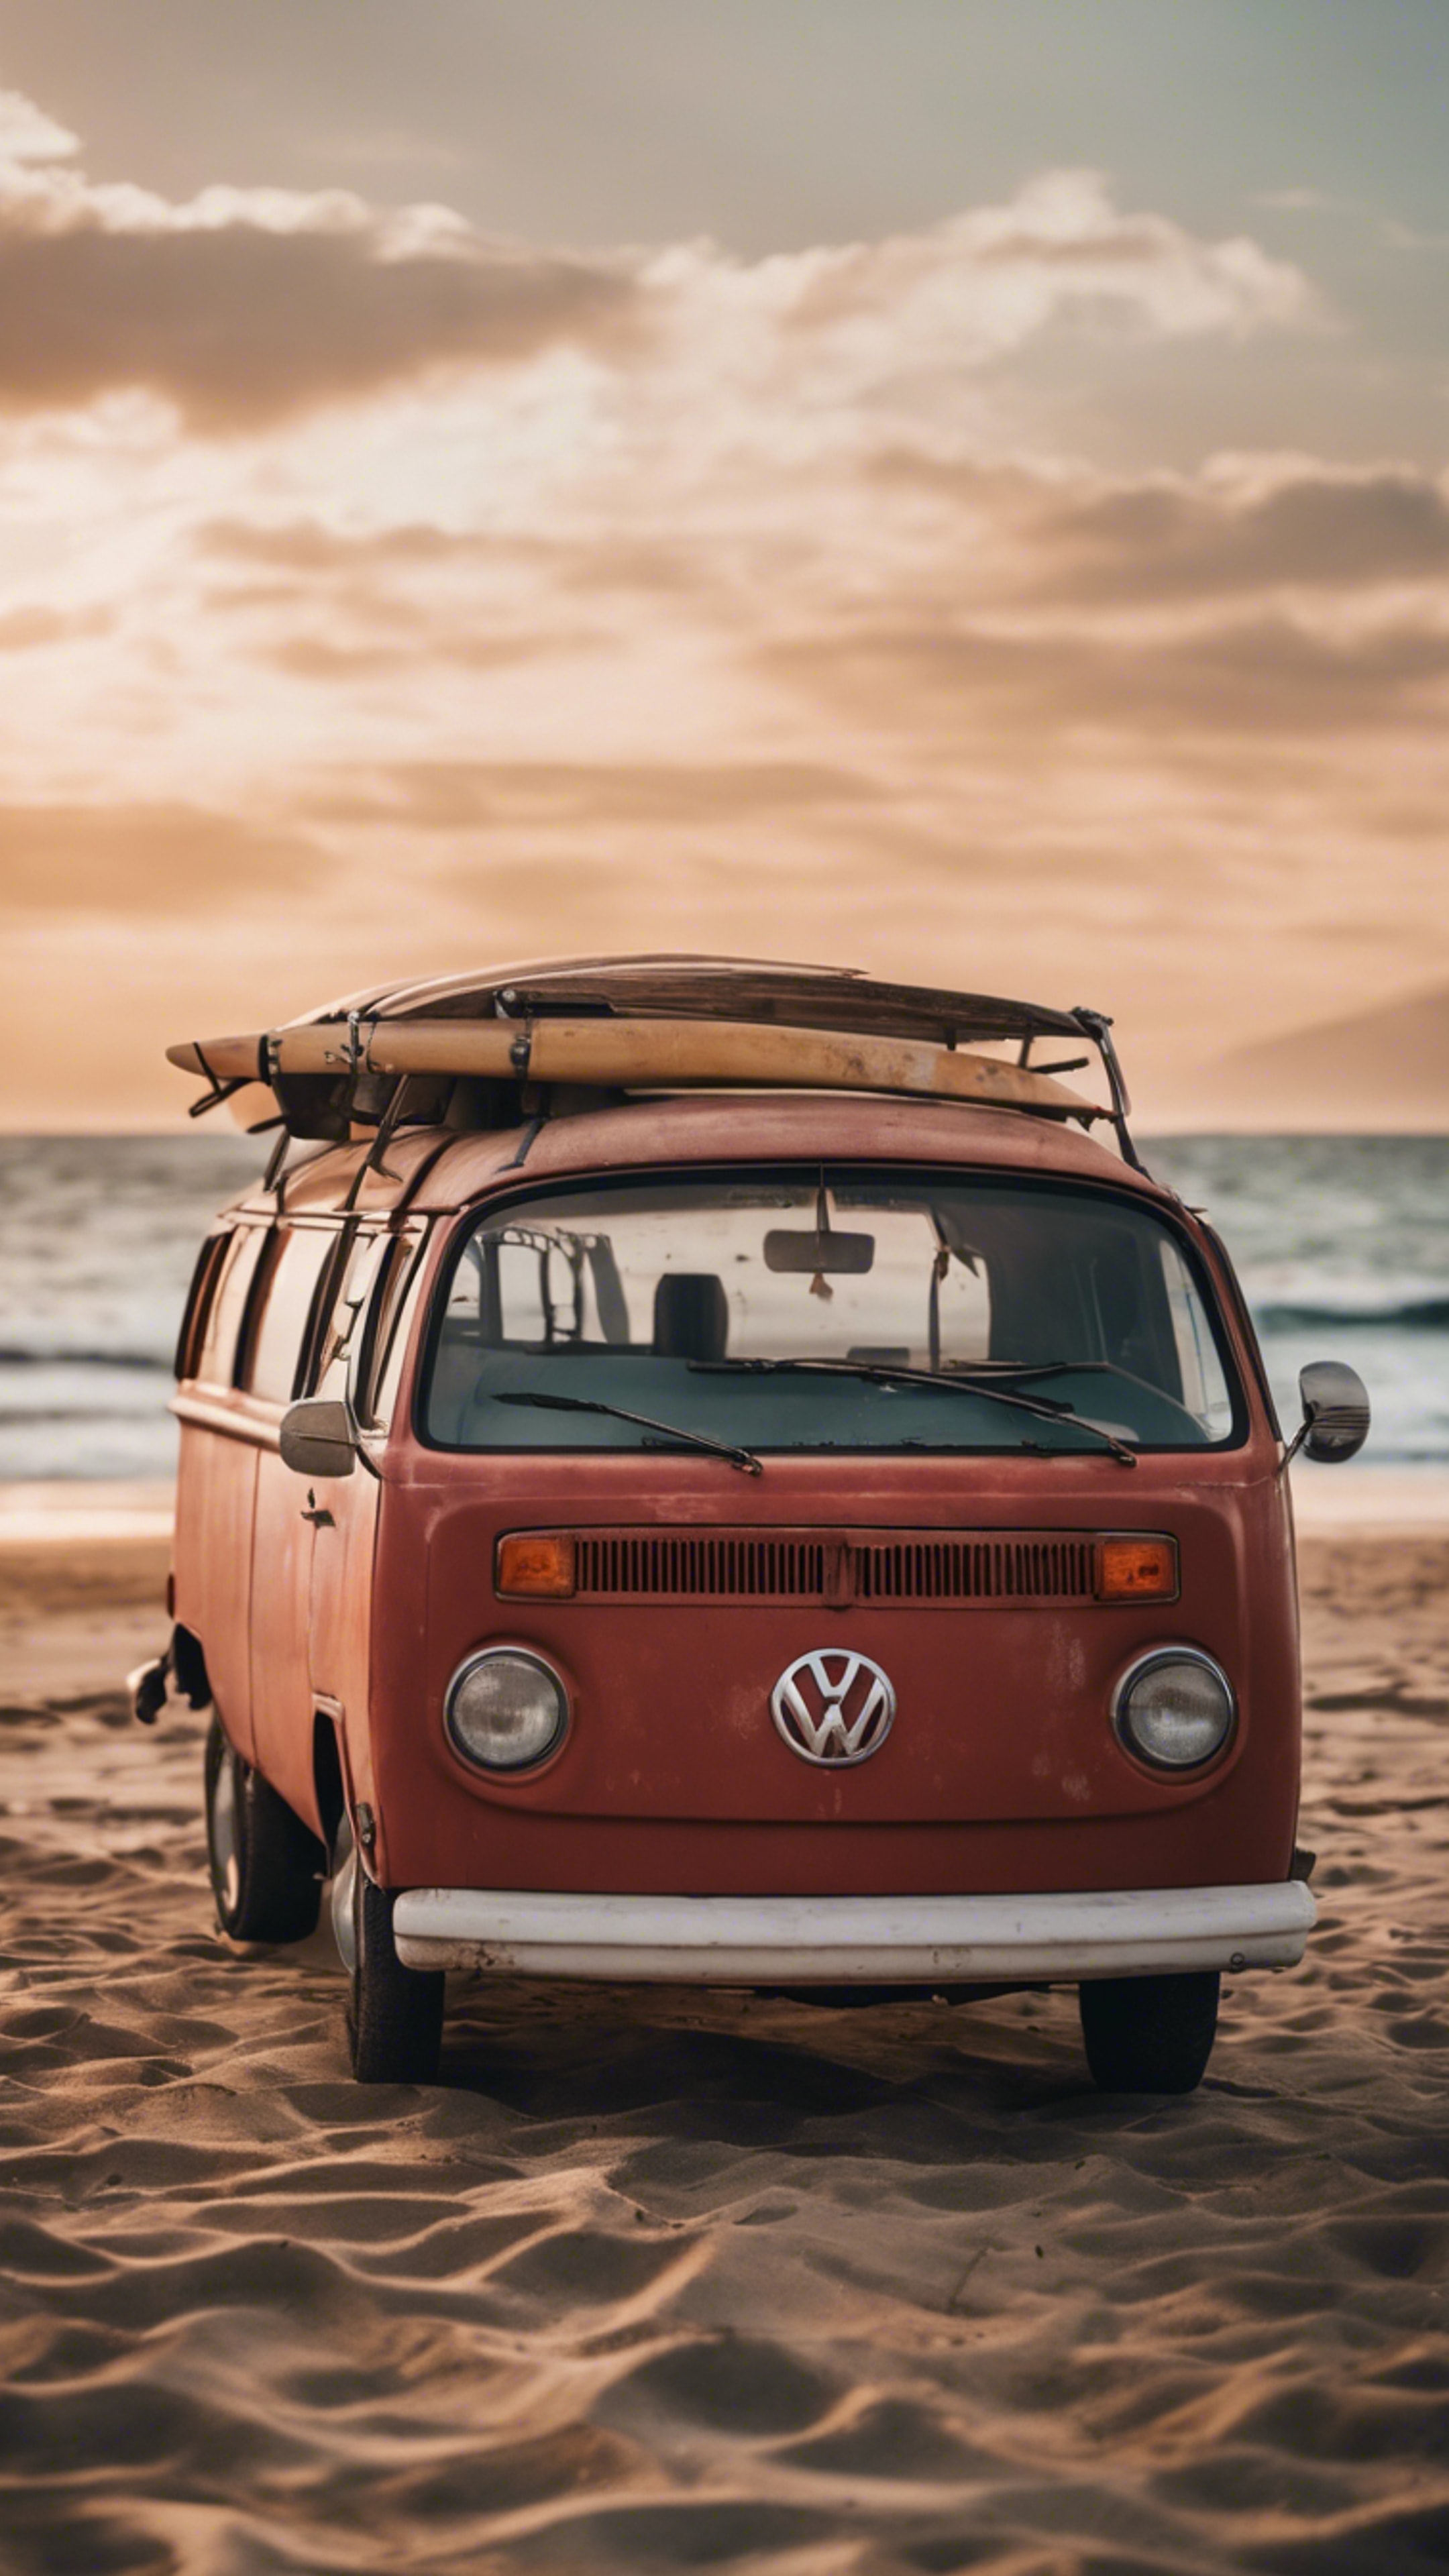 An old, rusted red Volkswagen van parked at a beach with the sunset in the backdrop, surfboards leaning against it. Wallpaper[f96813b3e584499cadbf]